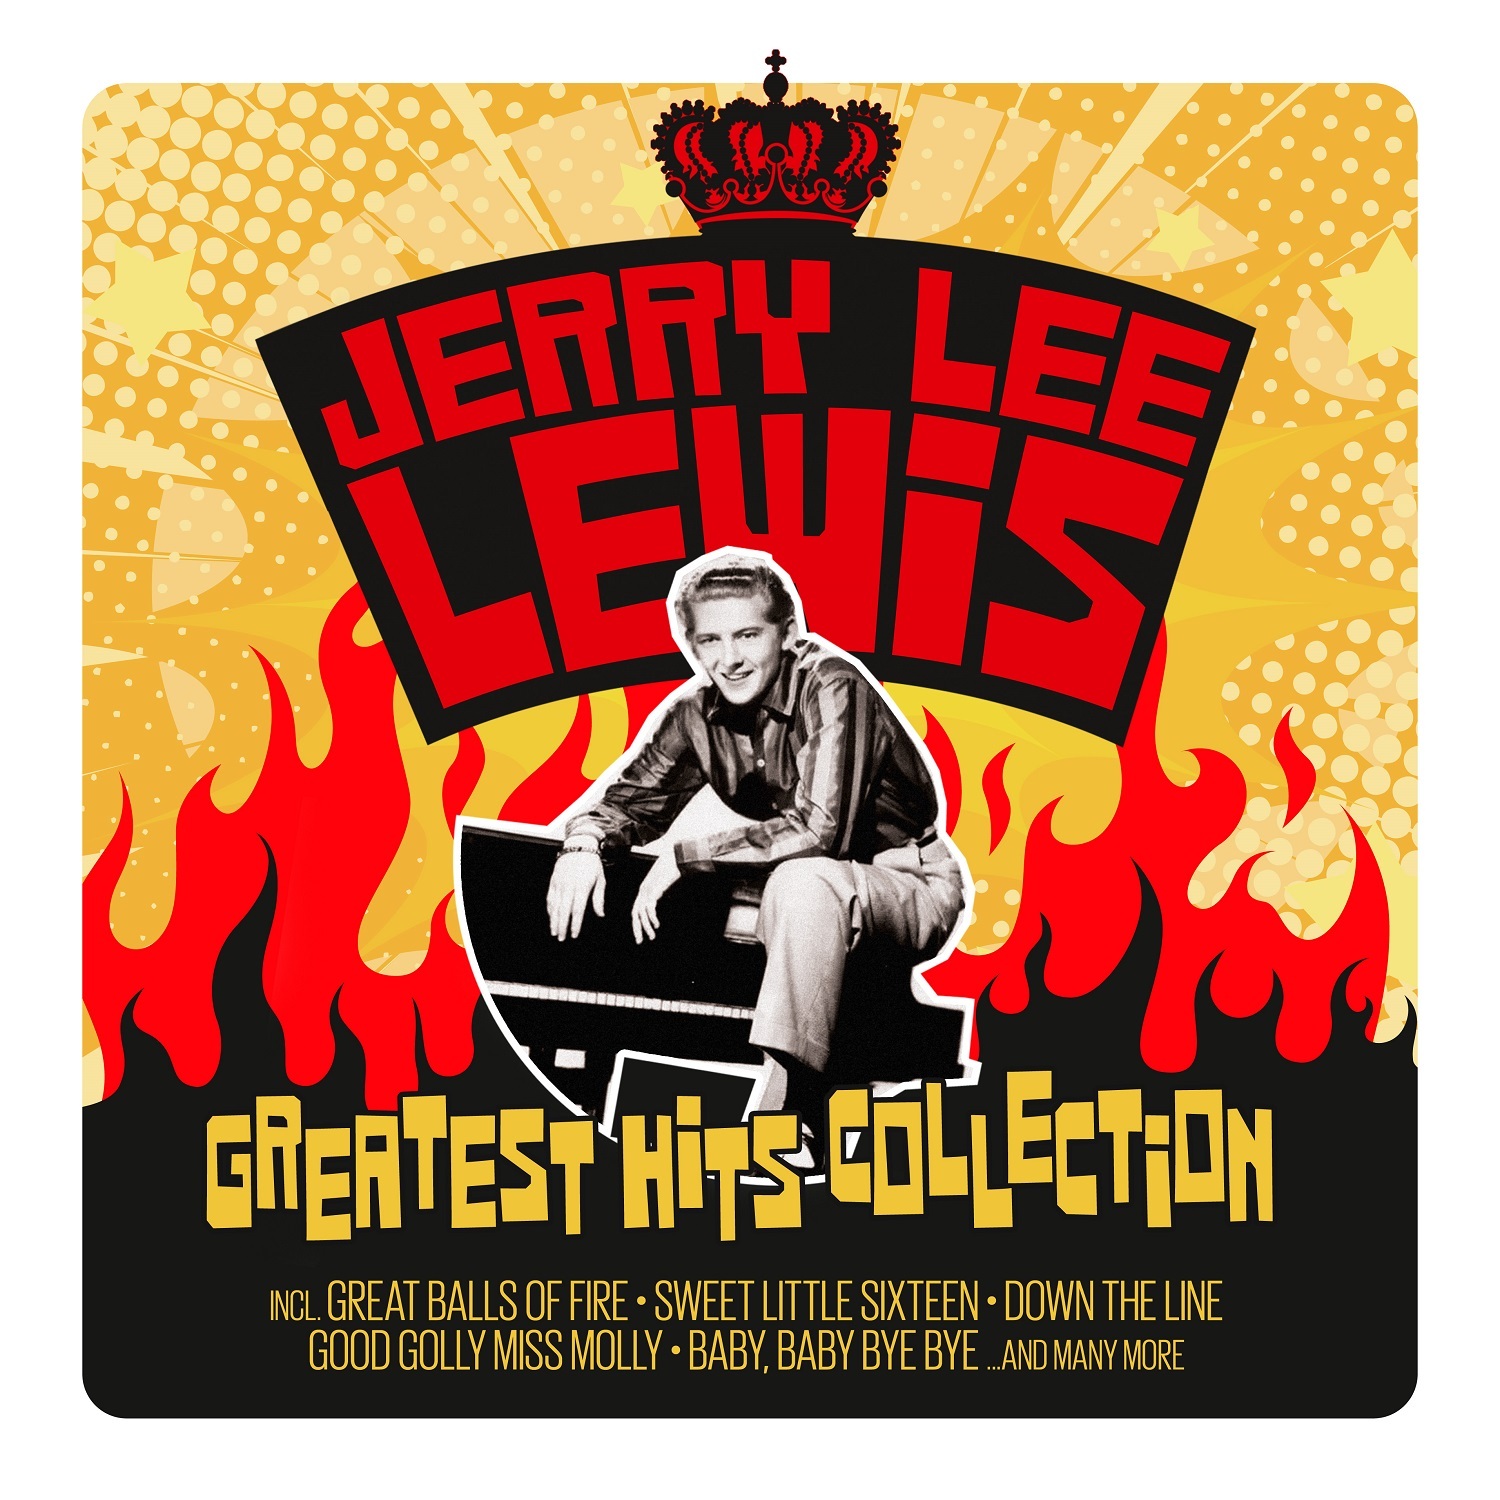 Jerry Lee Lewis great balls of Fire. Jerry Lee Lewis the collection LP. Jerry Lee Lewis great balls of Fire album. Jerry Vale "Greatest Hits" обложки альбомов.